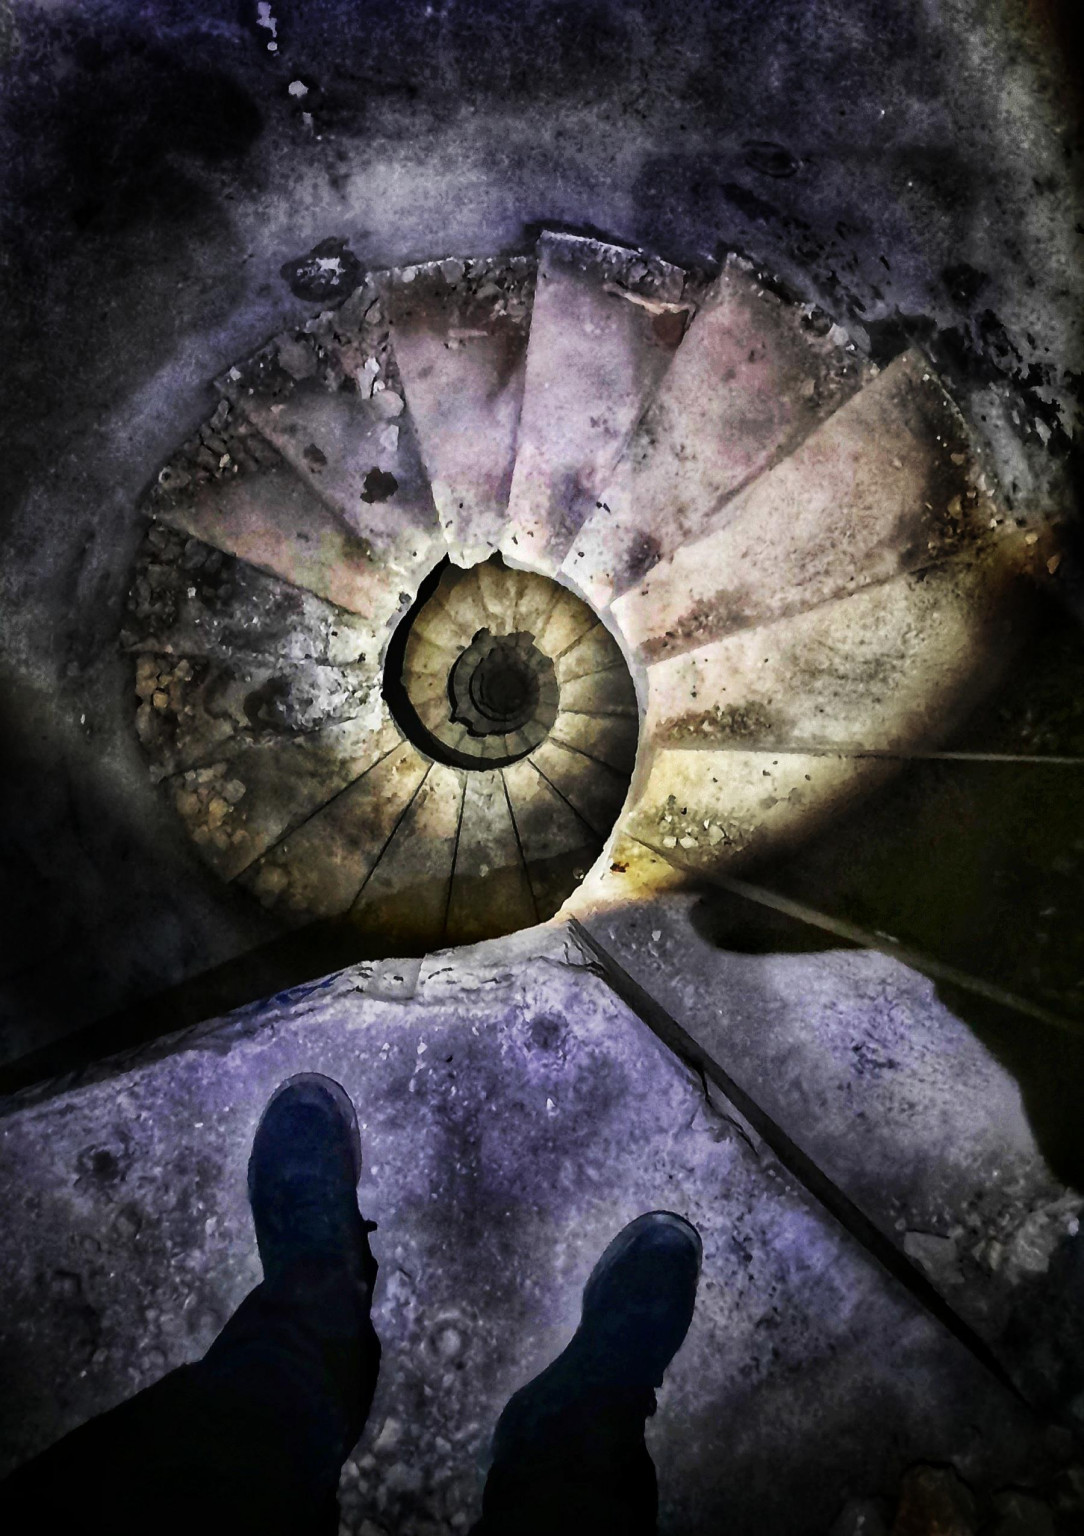 Went up and down this crazy spiral staircase in a huge abandoned WW2 Bunker (vid in comments)